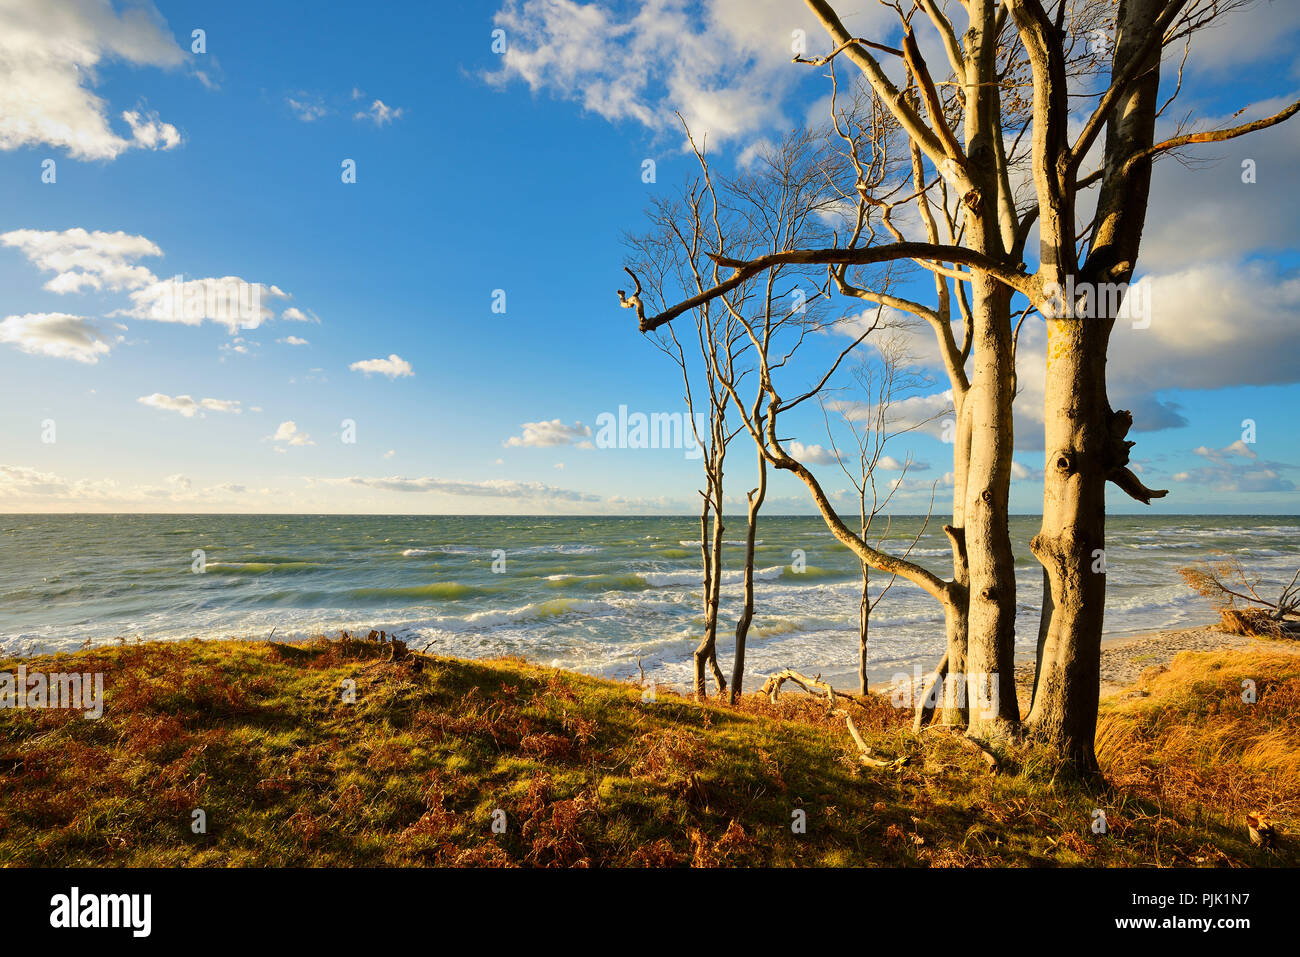 Germany, Mecklenburg-Western Pomerania, Fischland-Darß-Zingst, Darß Peninsula, Western Pomerania Lagoon Area National Park, coastal forest on the western beach, evening light, view of the stormy Baltic Sea Stock Photo